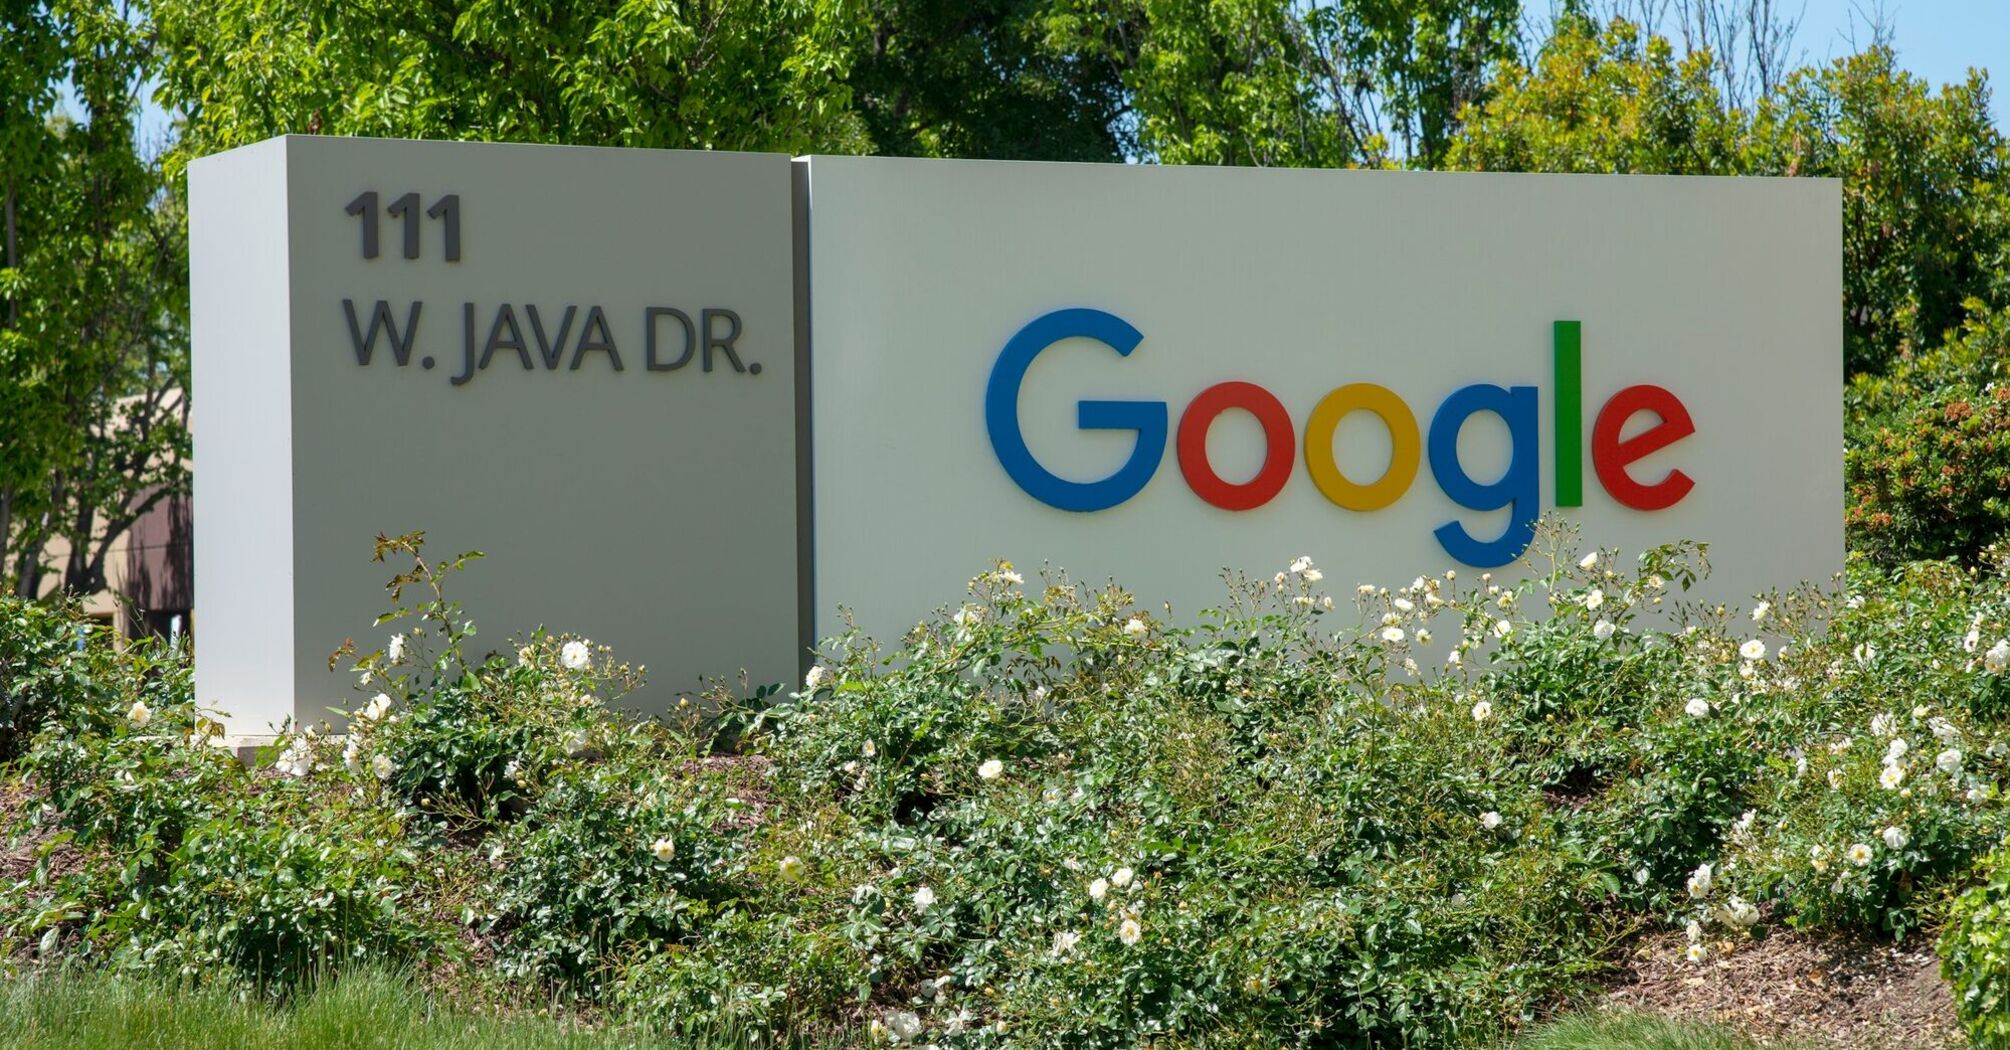 Google headquarters sign at 111 W. Java Dr